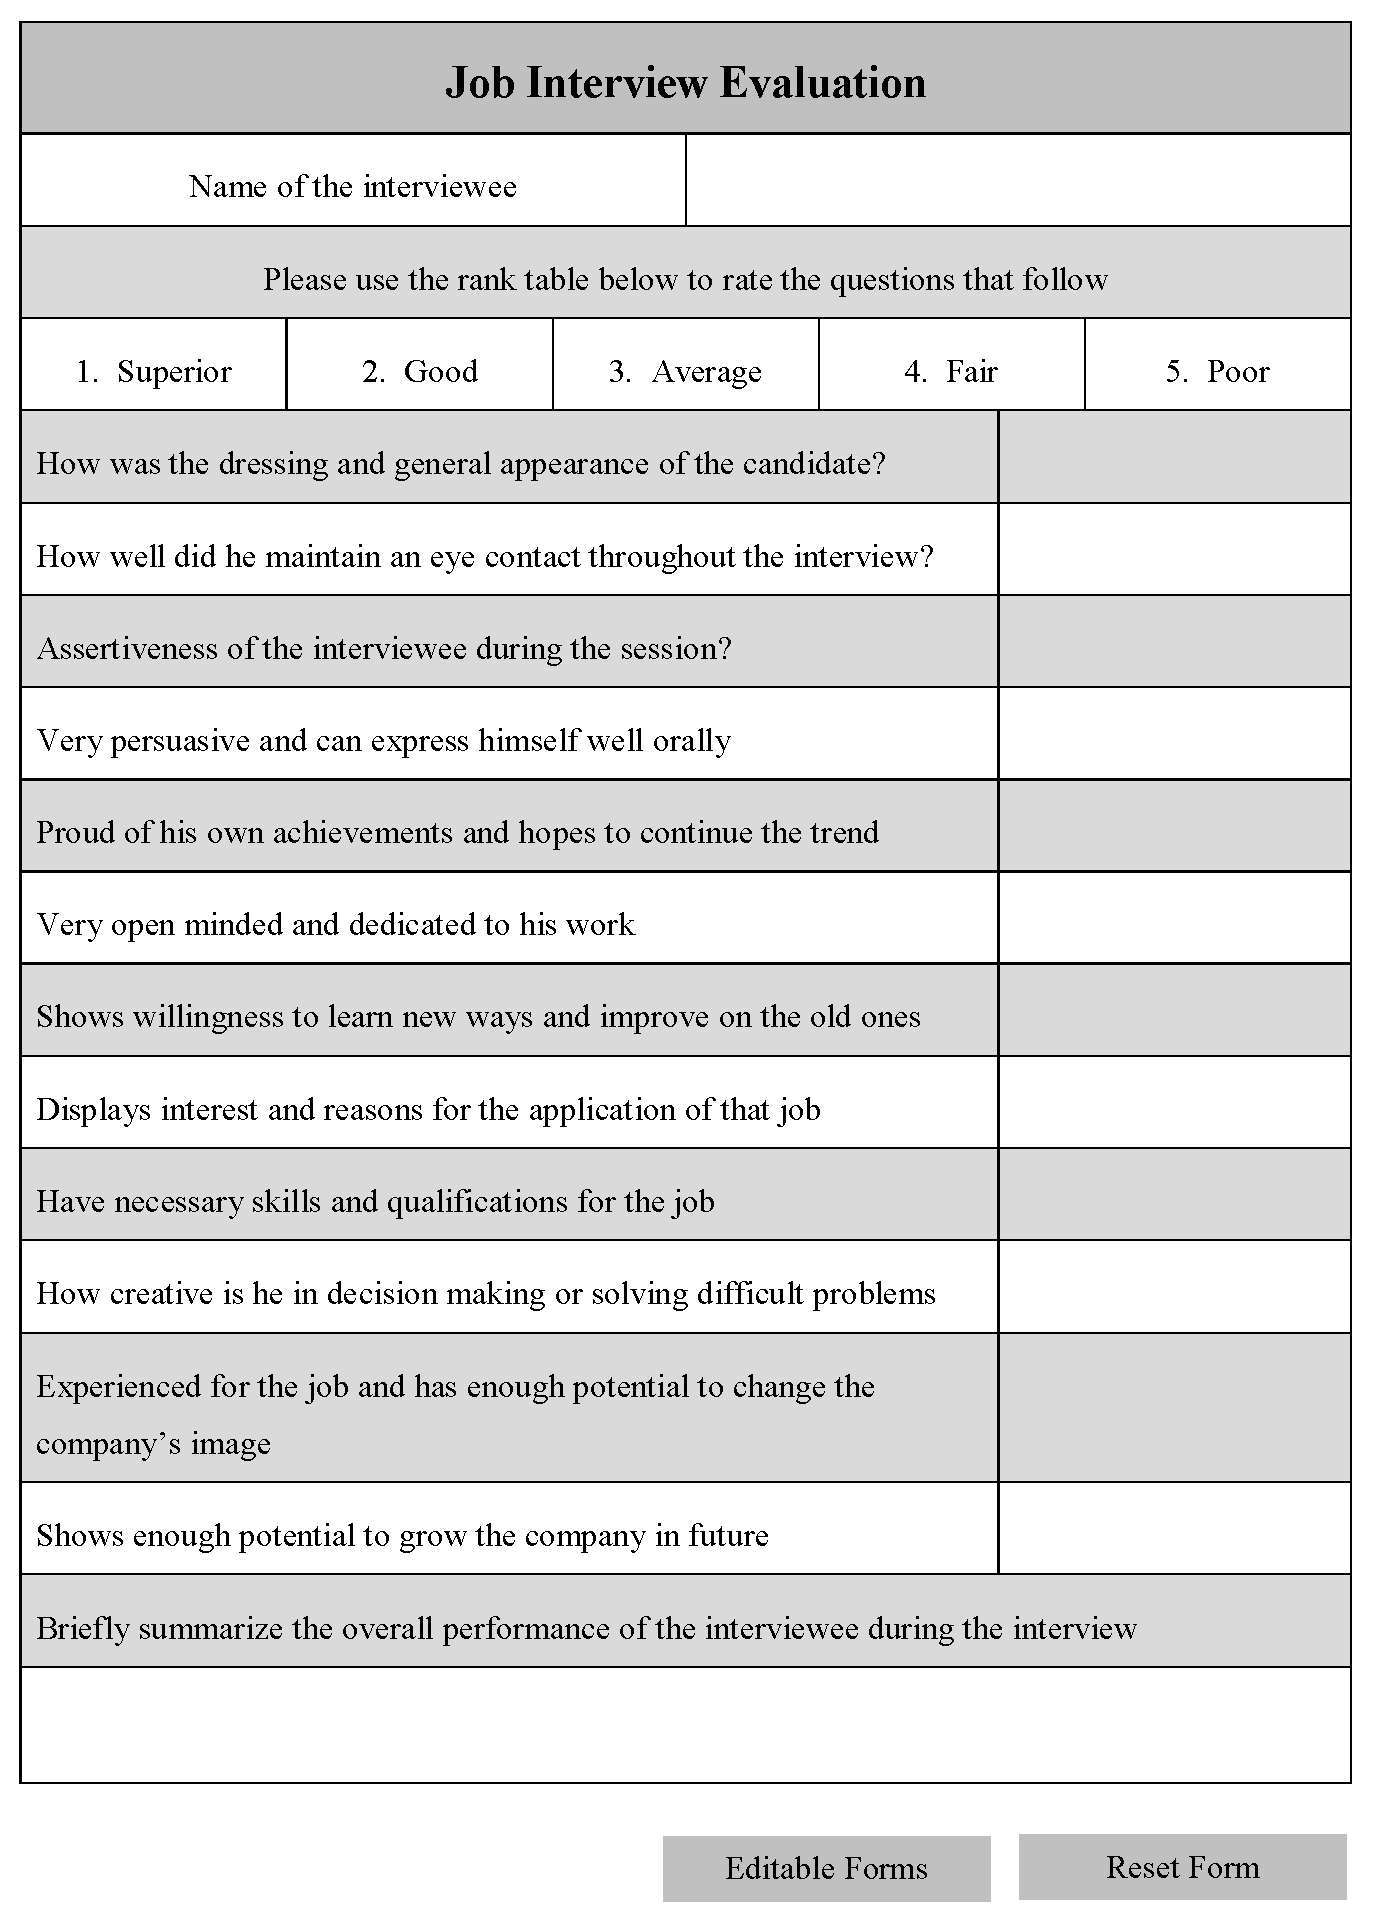 FREE 5 Sample Interview Evaluation Templates In PDF Printable Forms